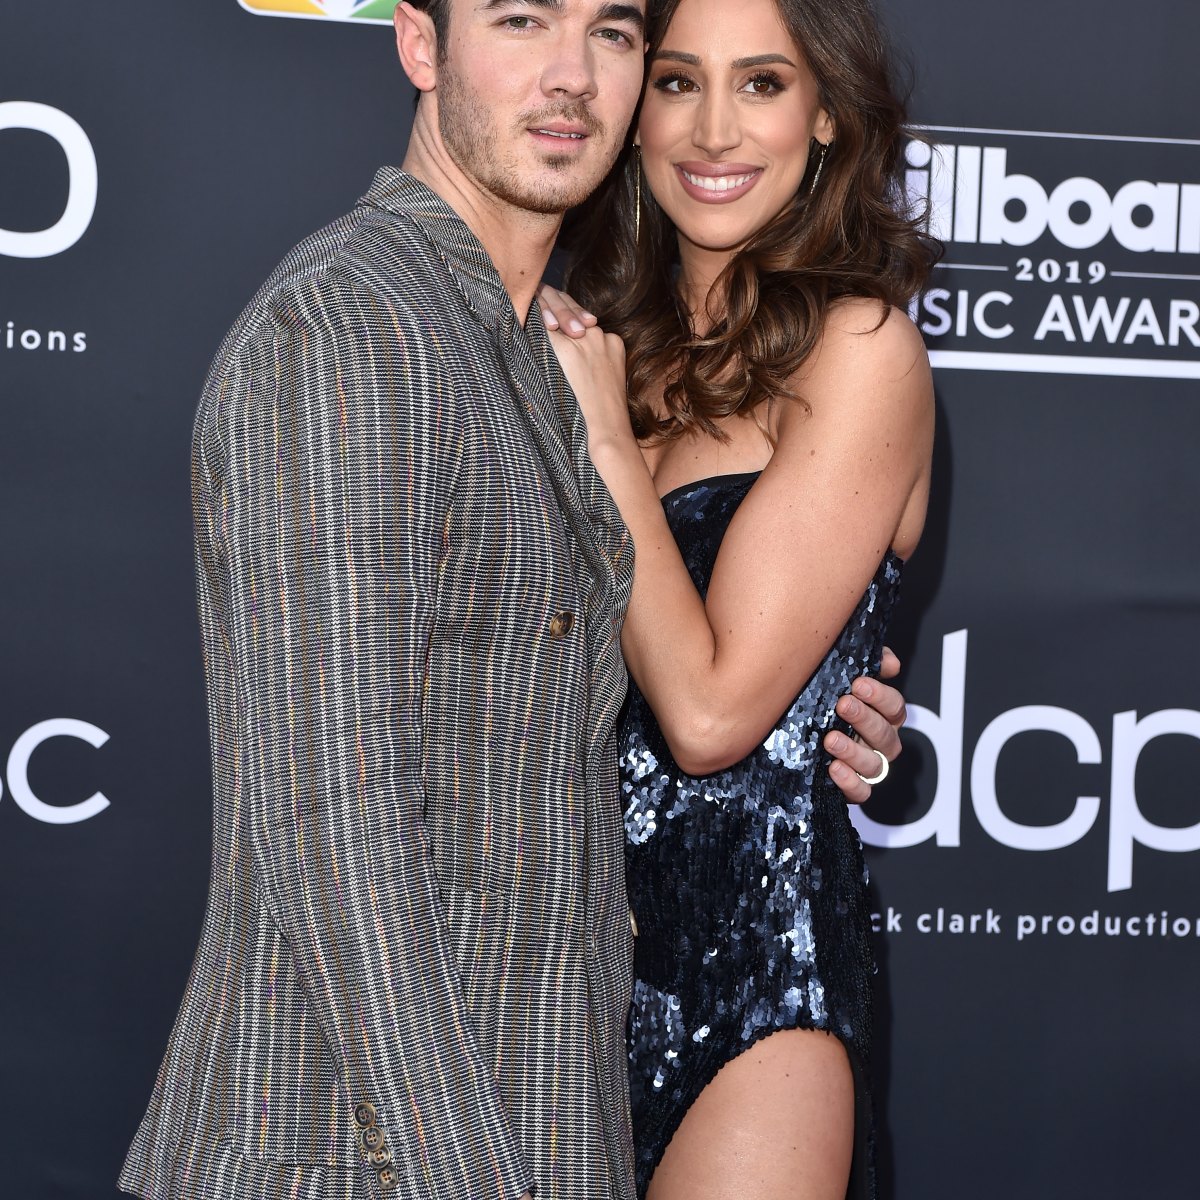 Why Kevin Jonas and Danielle Jonas May Have the Sweetest Love Story